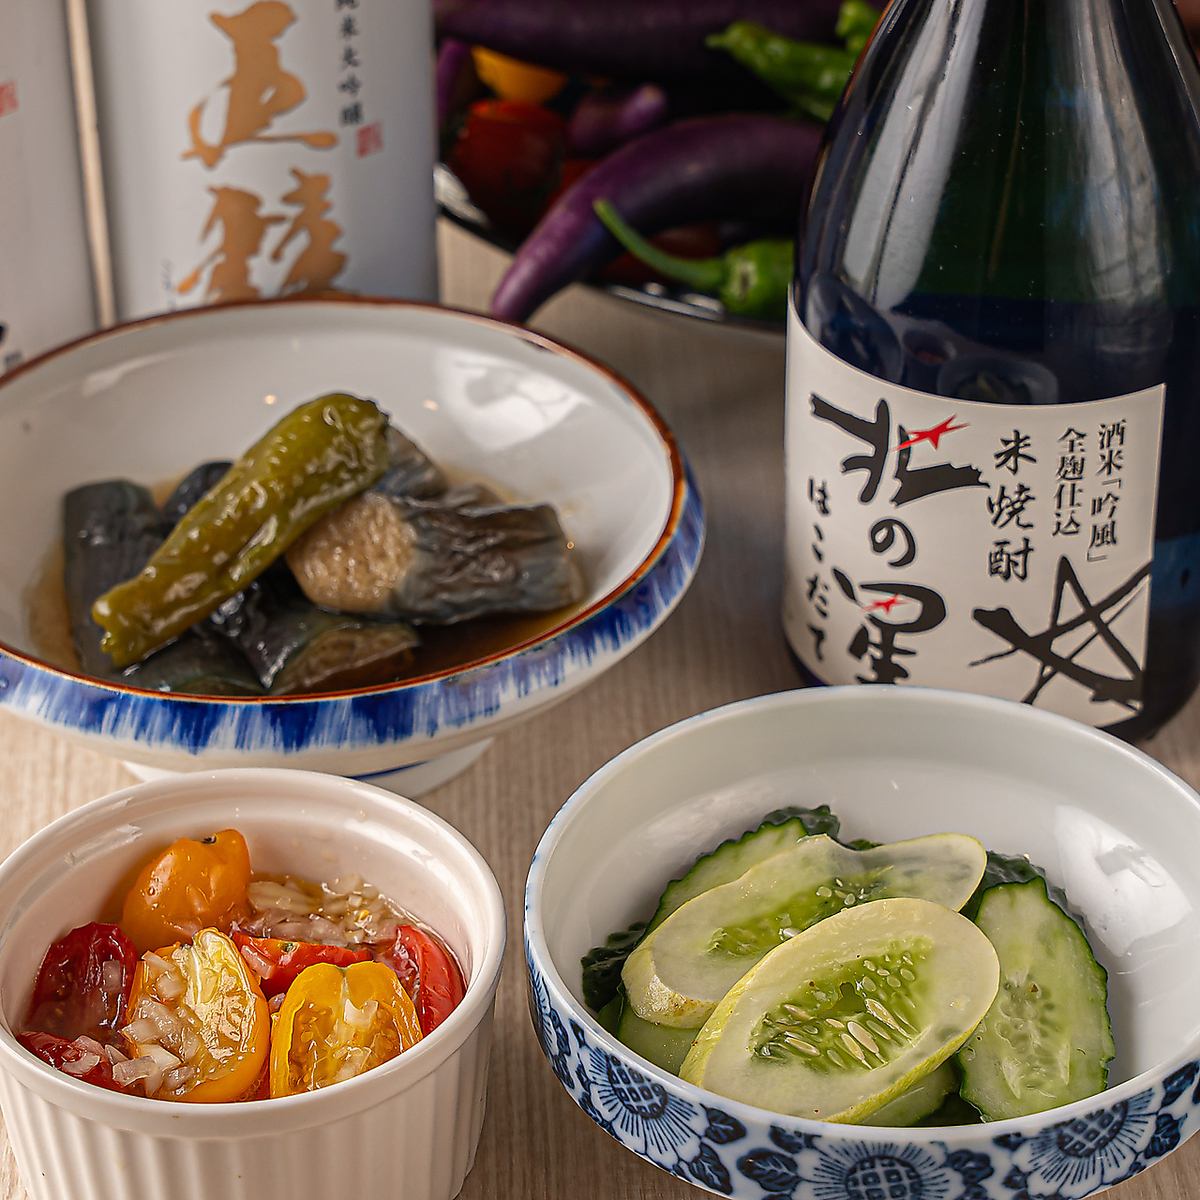 An izakaya where parents and children can enjoy! Seafood delivered directly from Hakodate, which you can't usually taste in Osaka!